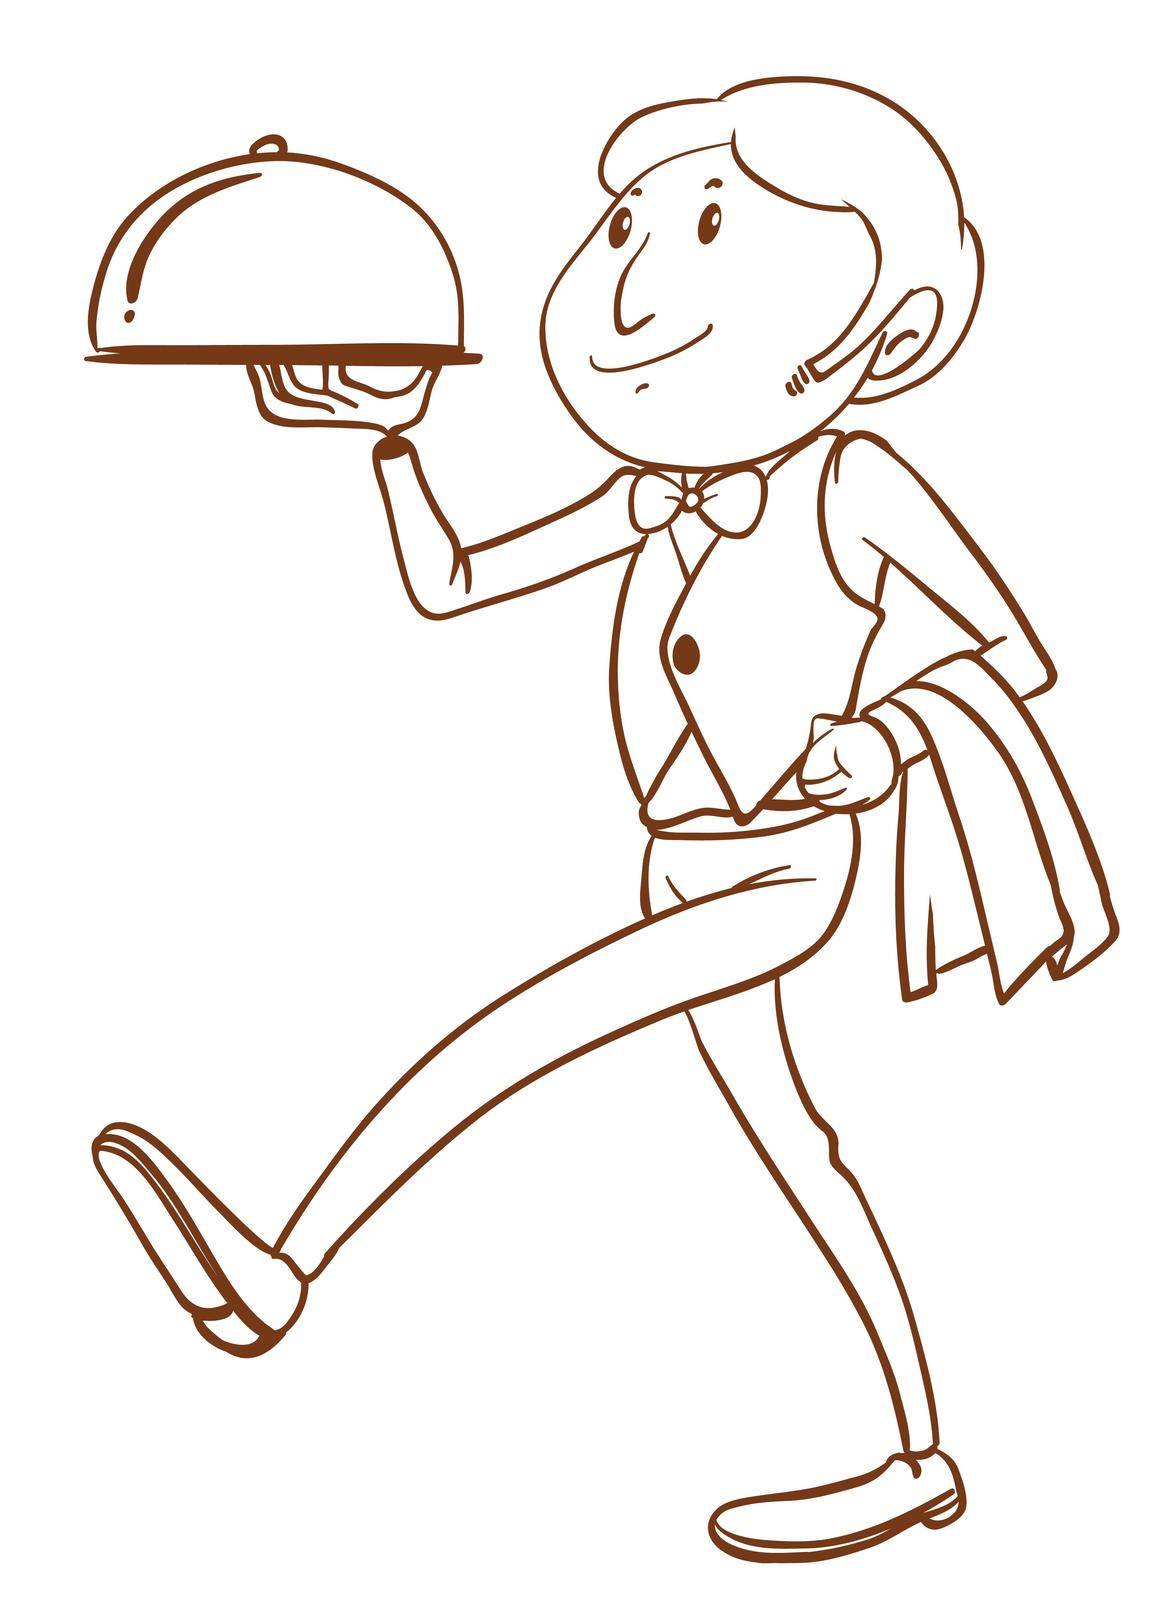 Illustration of a simple drawing of a waiter on a white background